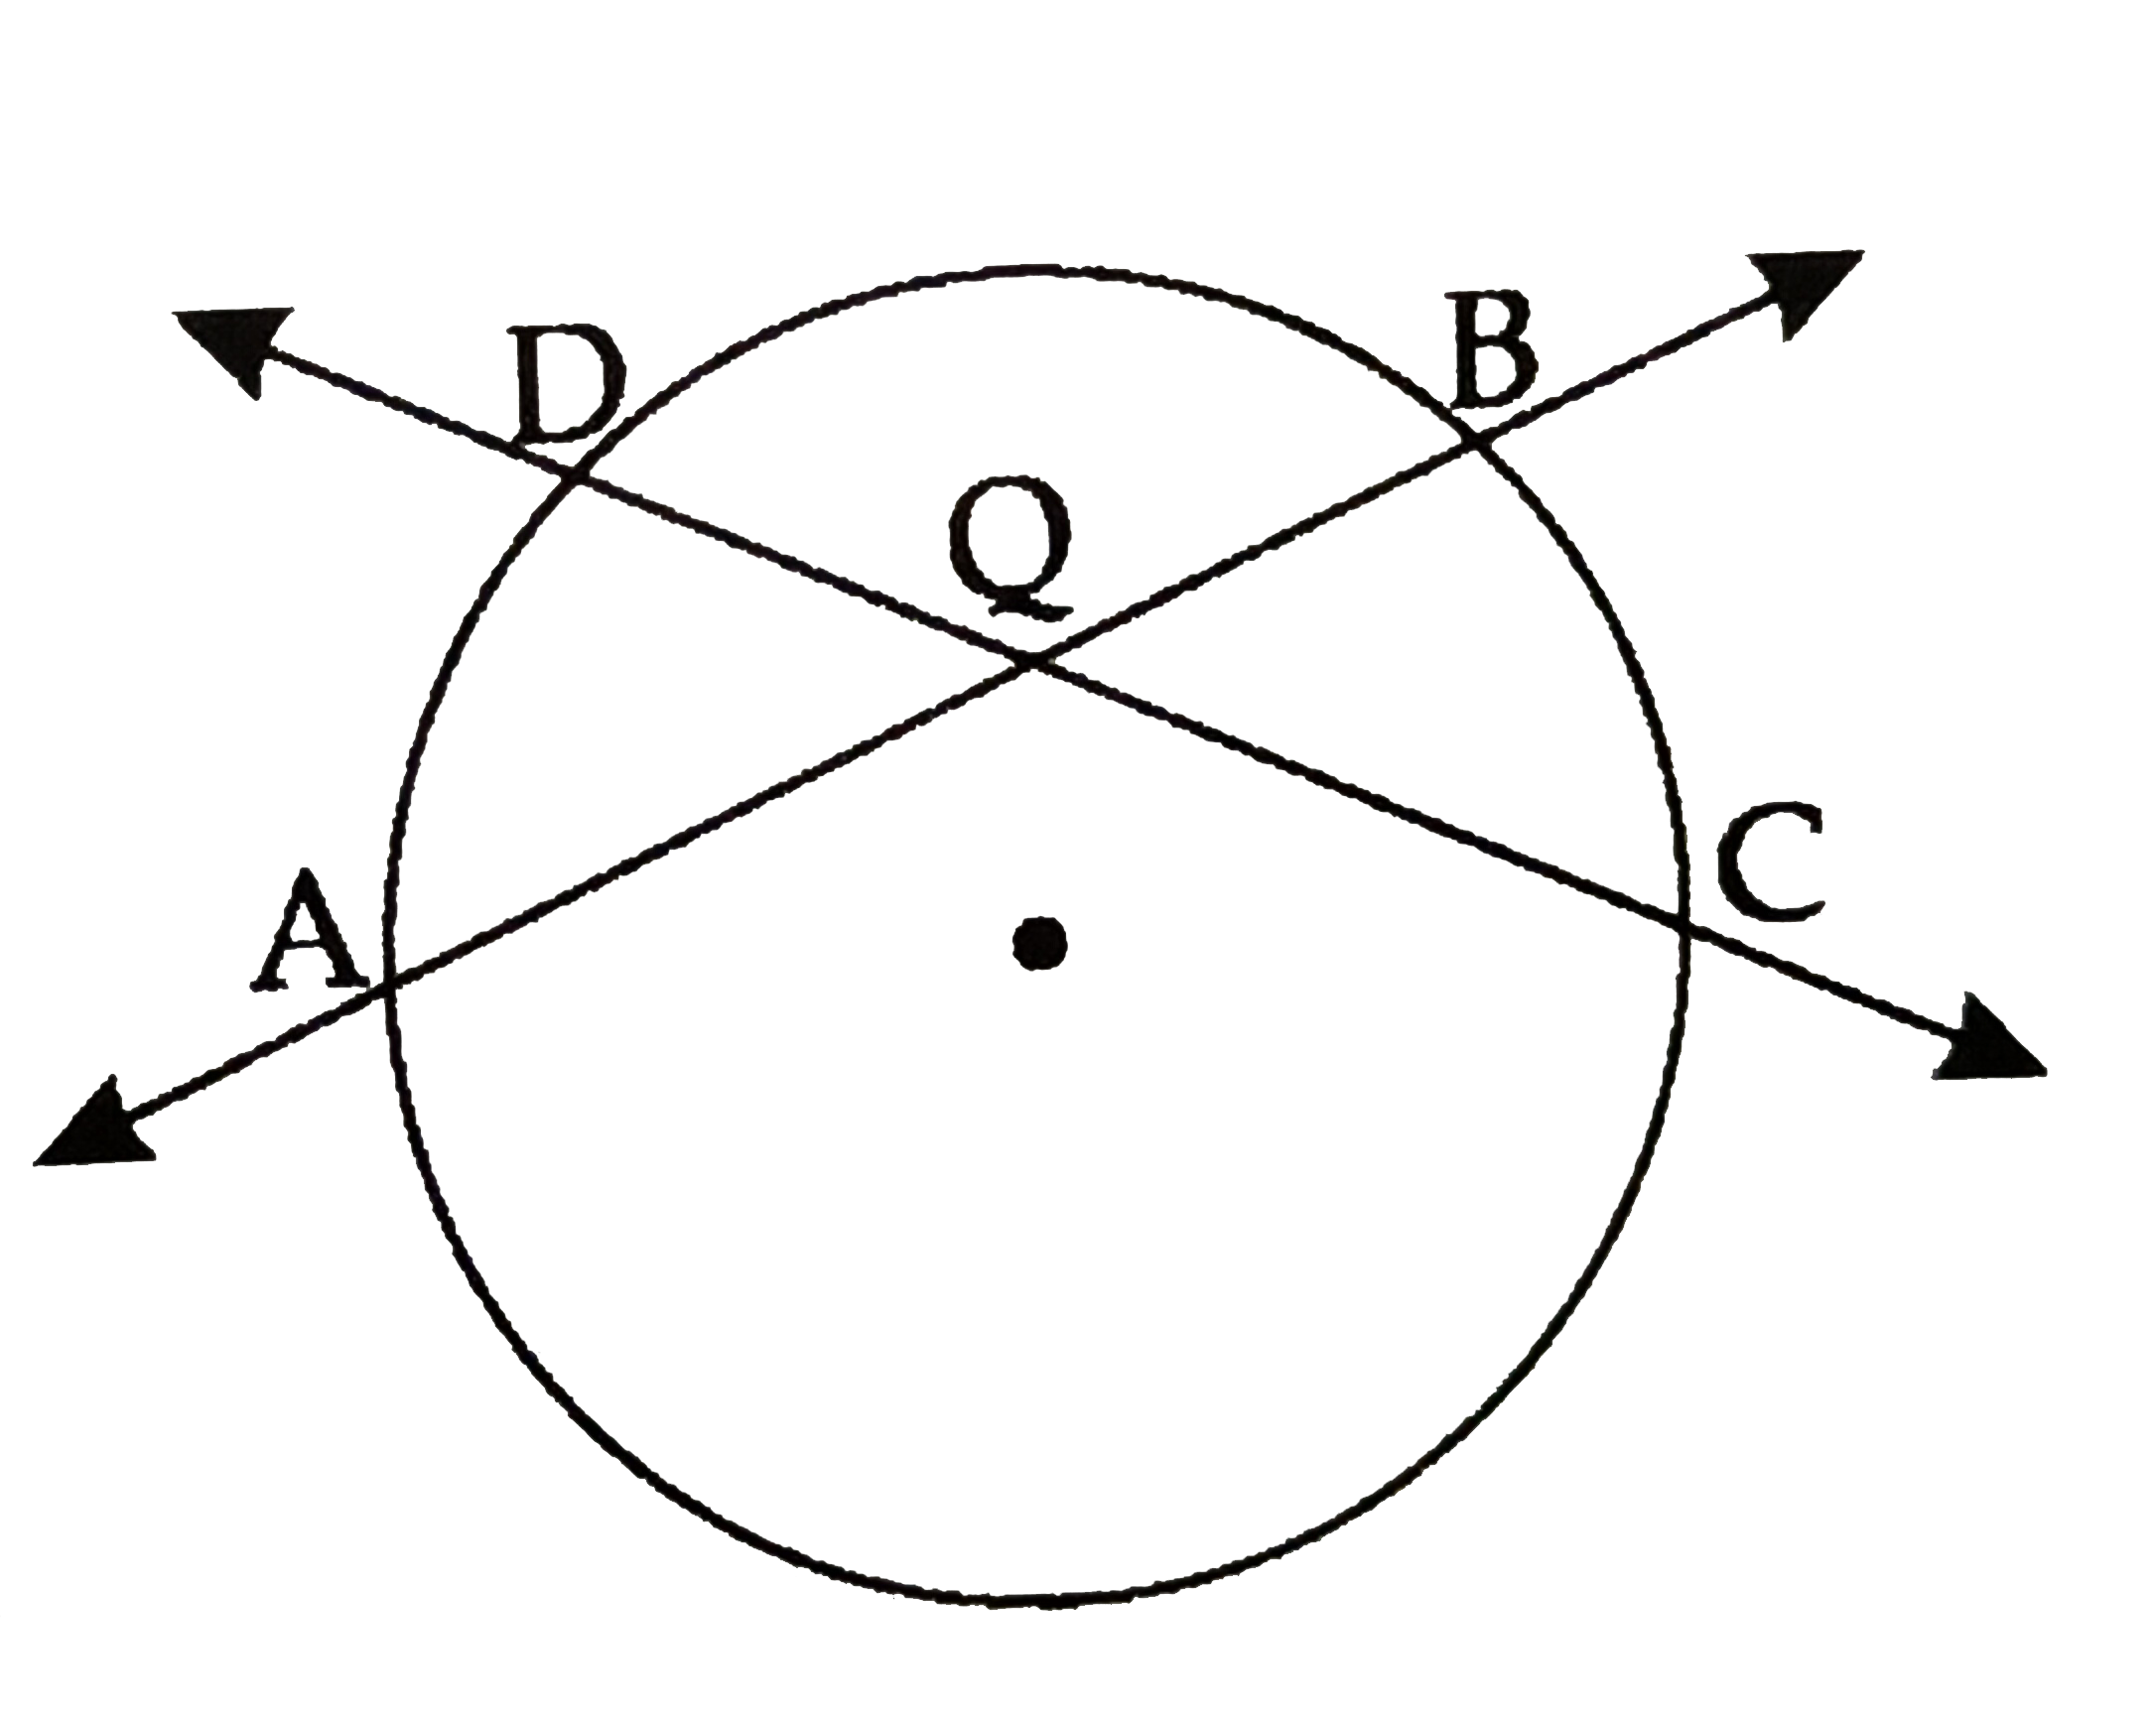 chords AB and CD of a circle intersect in point Q in the interior of a circle of a shown in the figure. If m(arc AD) =20^(@) , and m(ARC BC) =36^(@)  then find  angleBQC